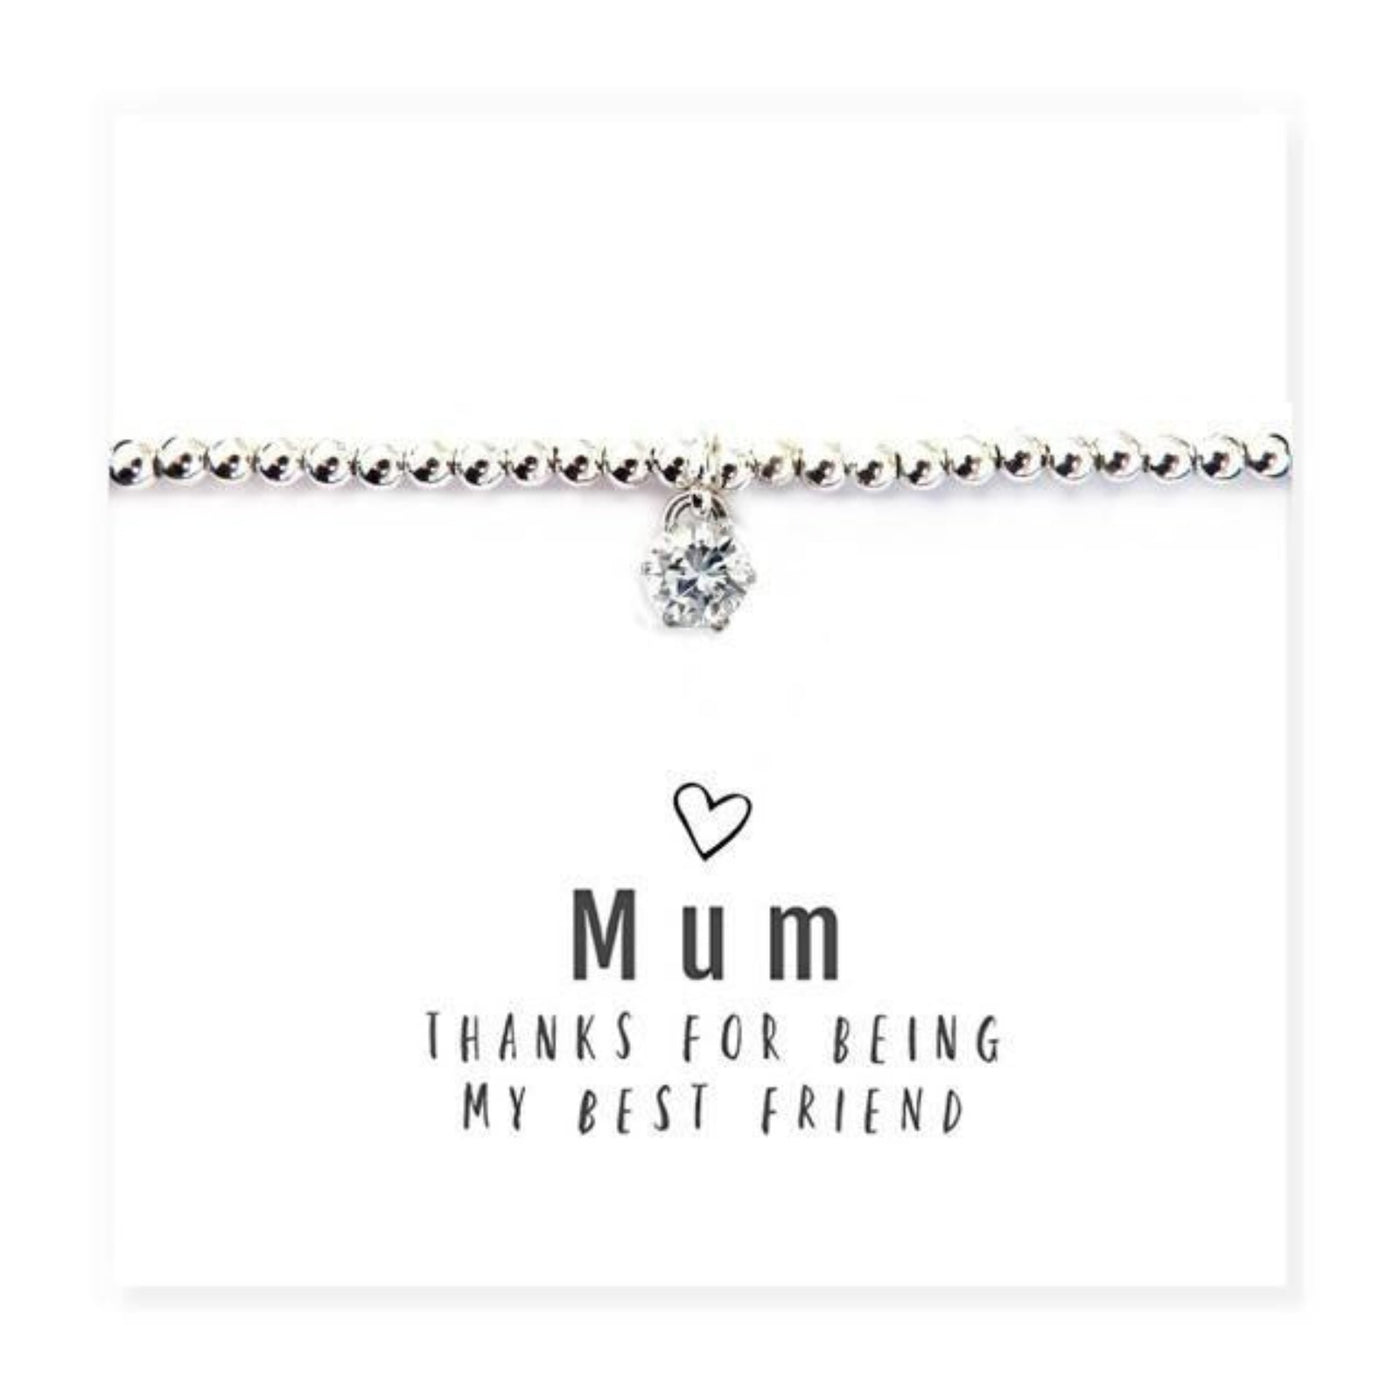 Mum Thanks For Being My Best Friend - Cubic Zirconia Bracelet And Message Card.